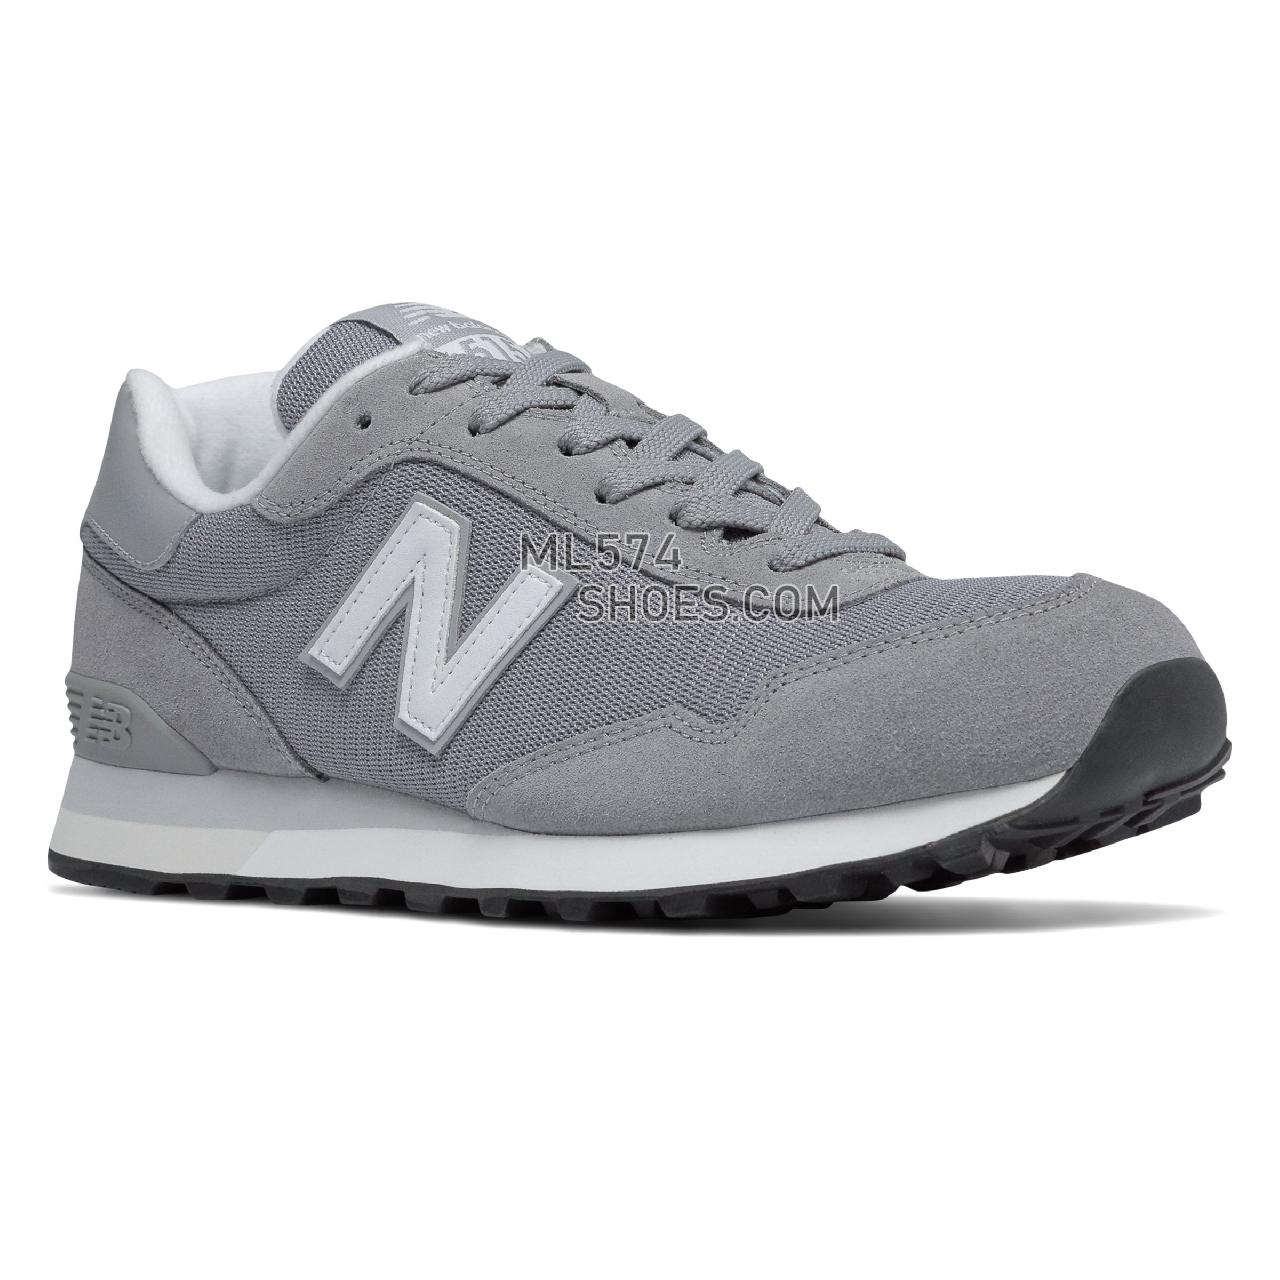 New Balance 515 Classic - Men's Sport Style Sneakers - Steel with White - ML515RSA